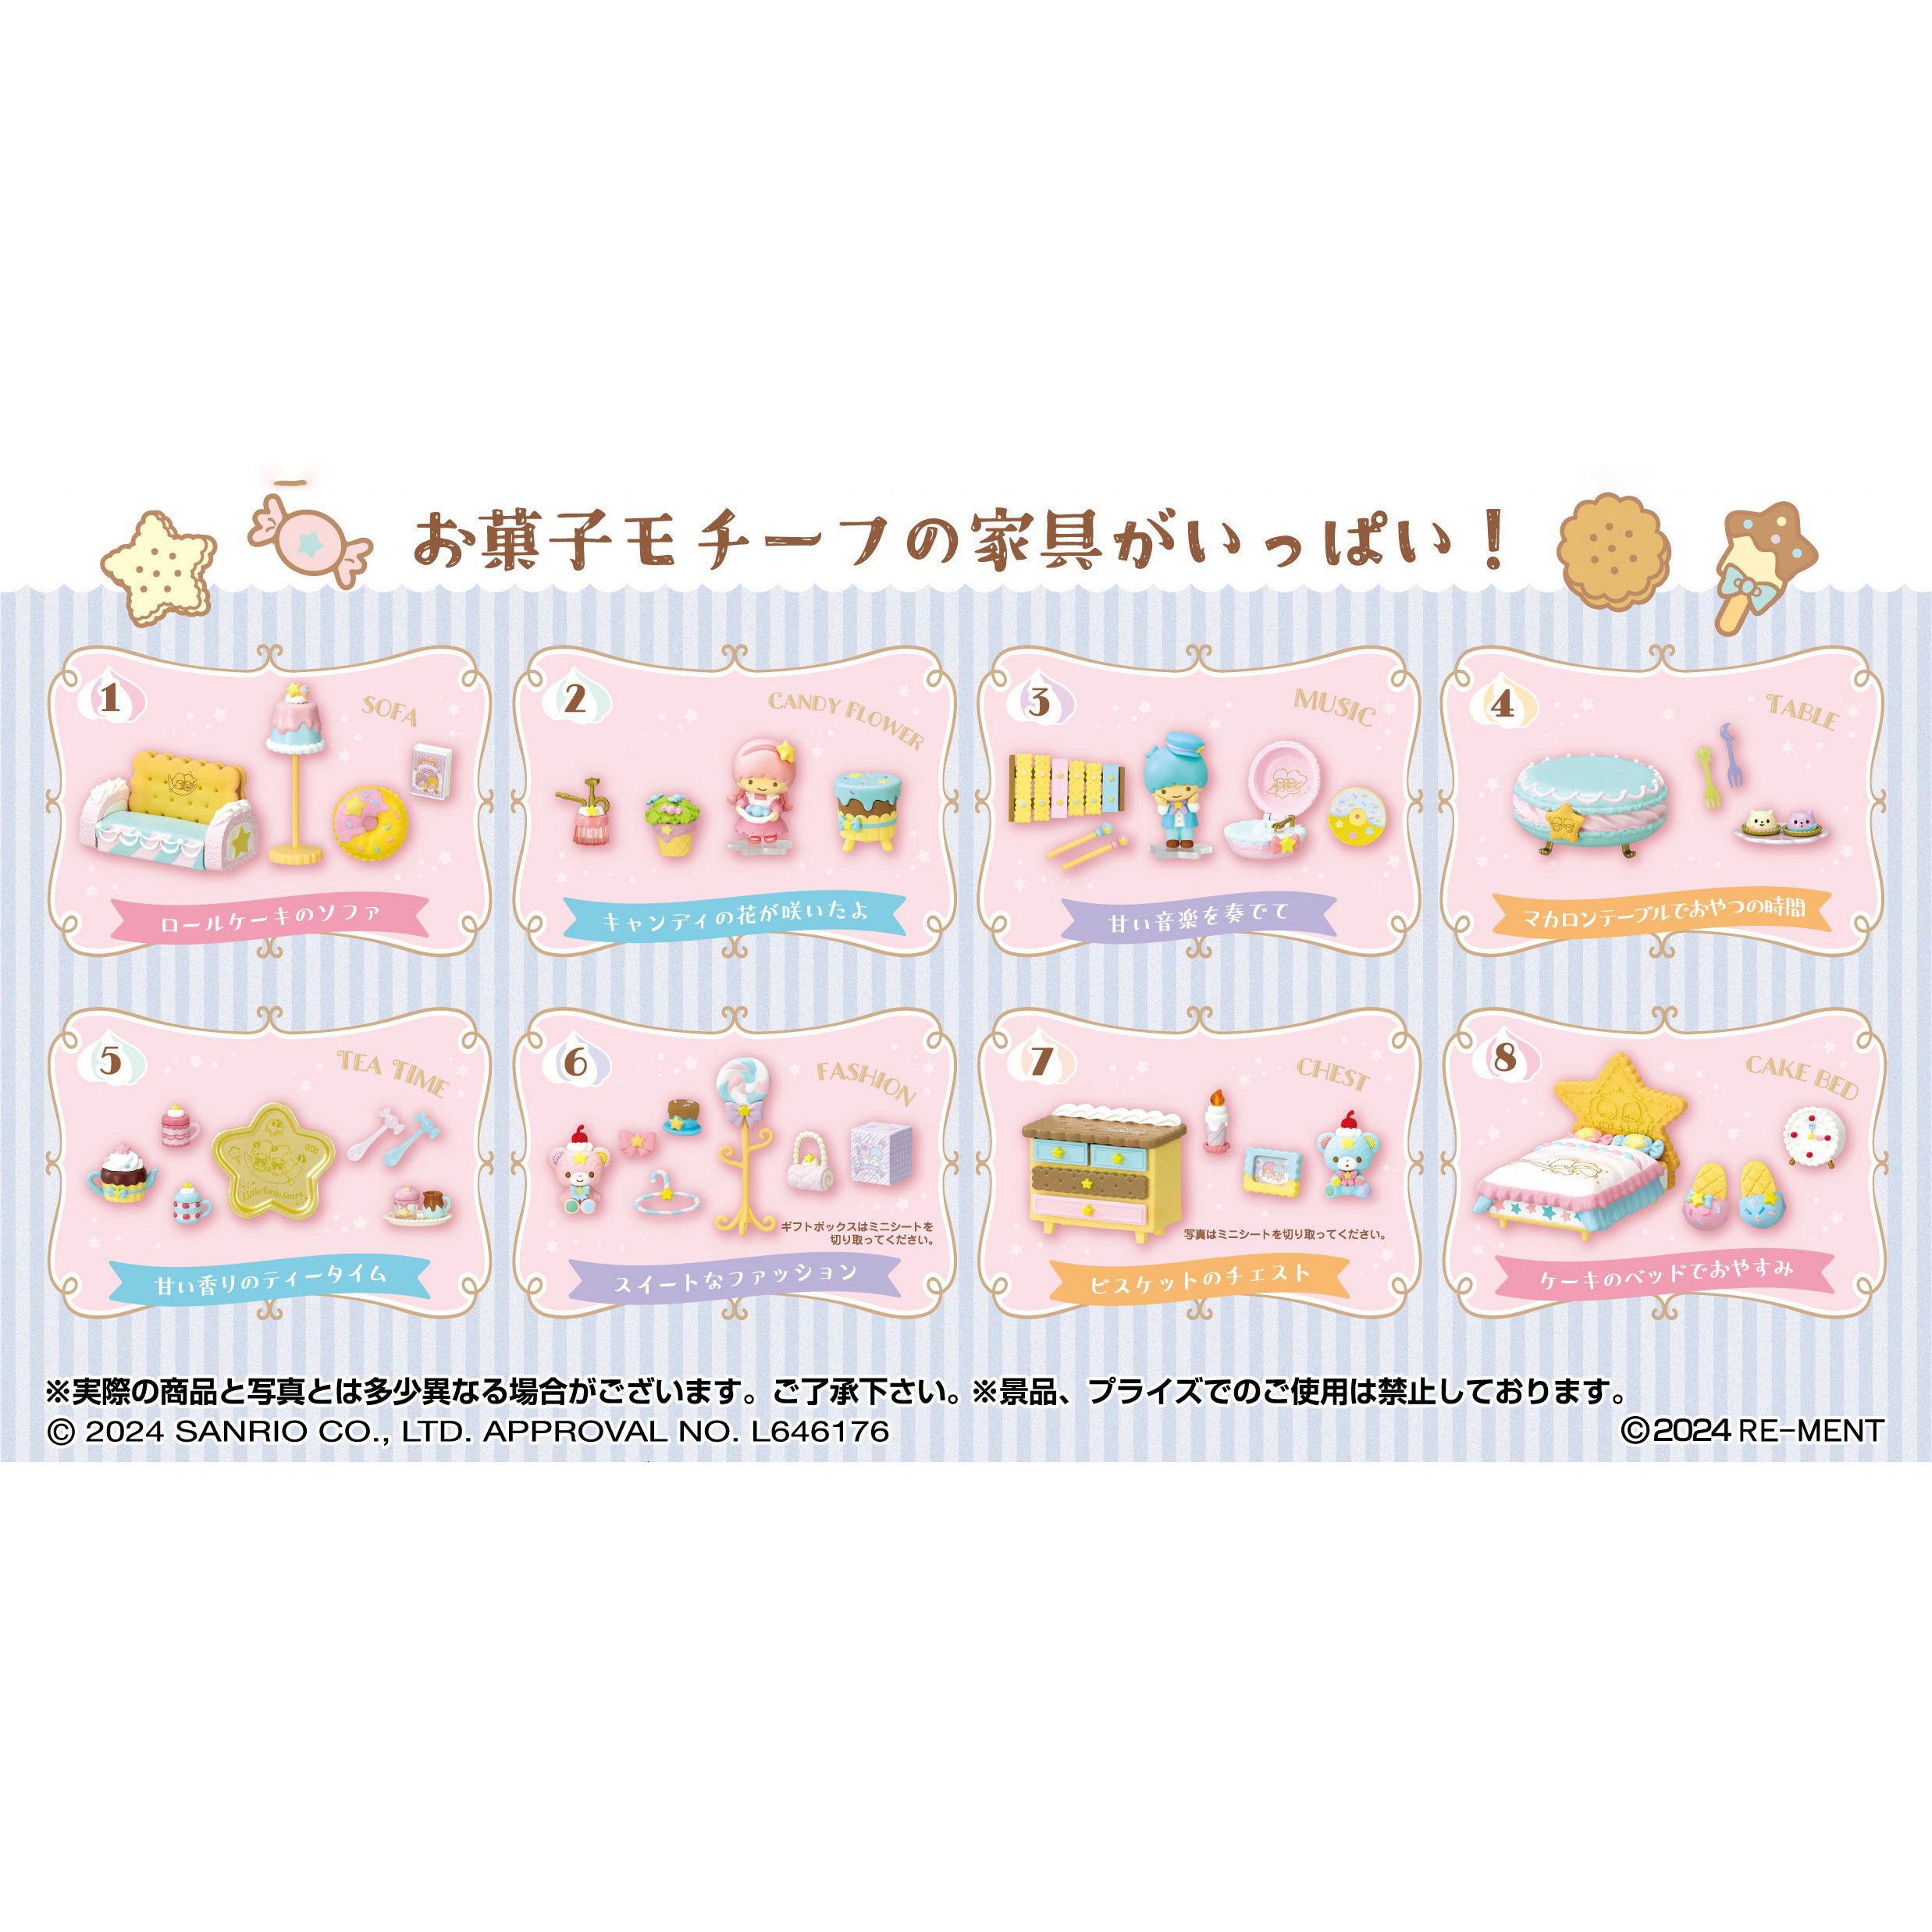 Re-Ment - Sanrio - Little Twin Stars Pastel Sweets Room (Box of 8) - Marvelous Toys